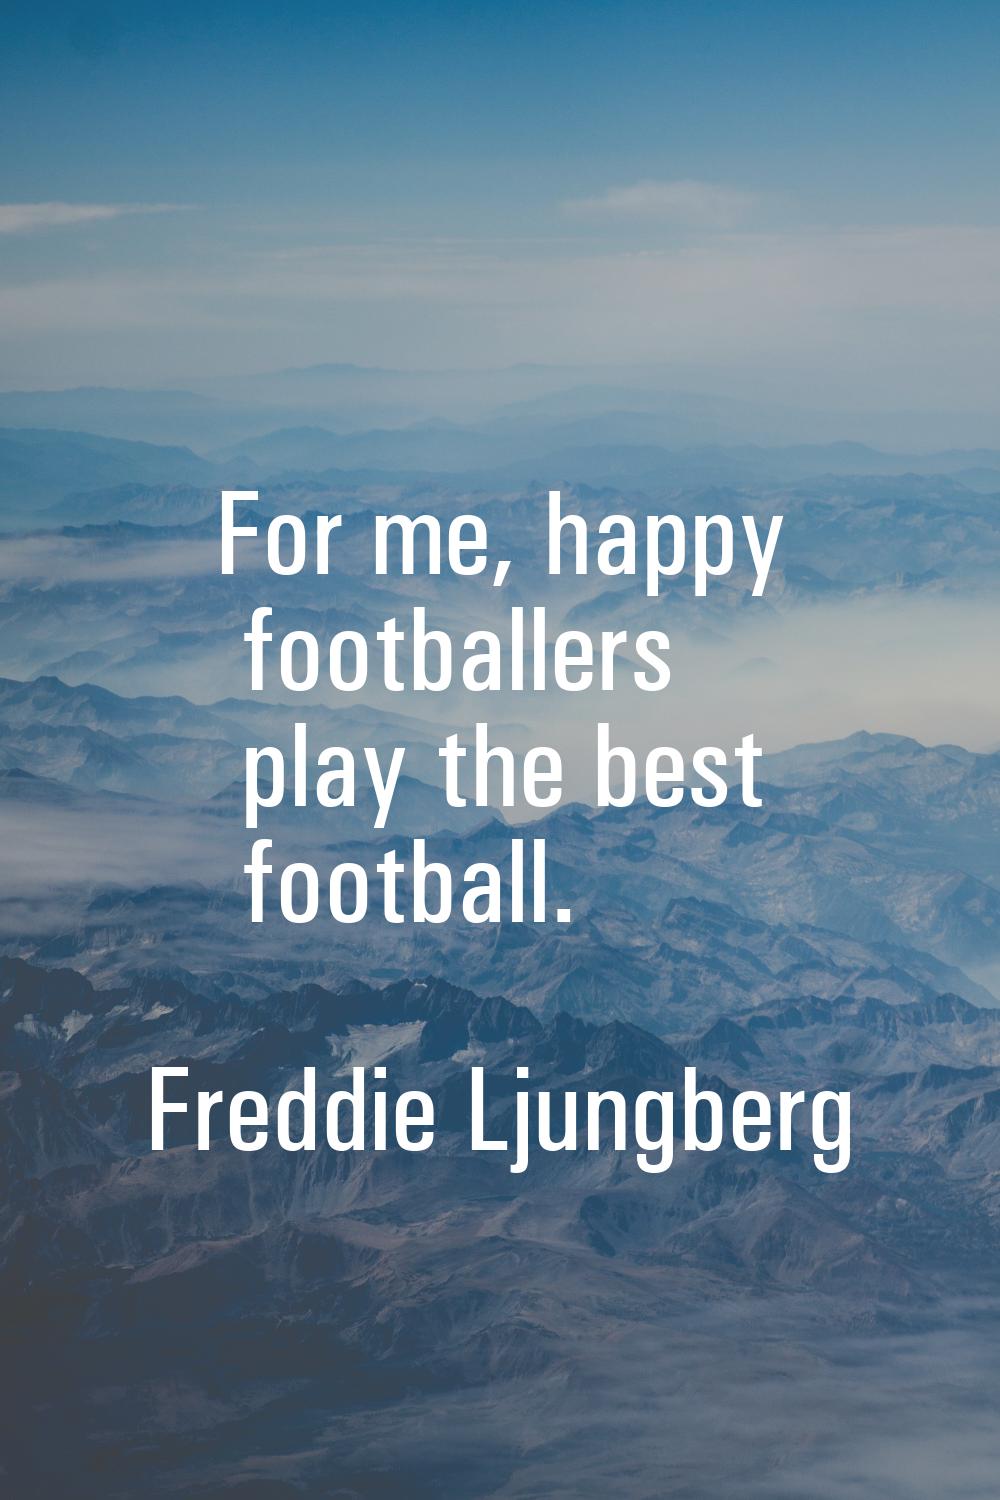 For me, happy footballers play the best football.